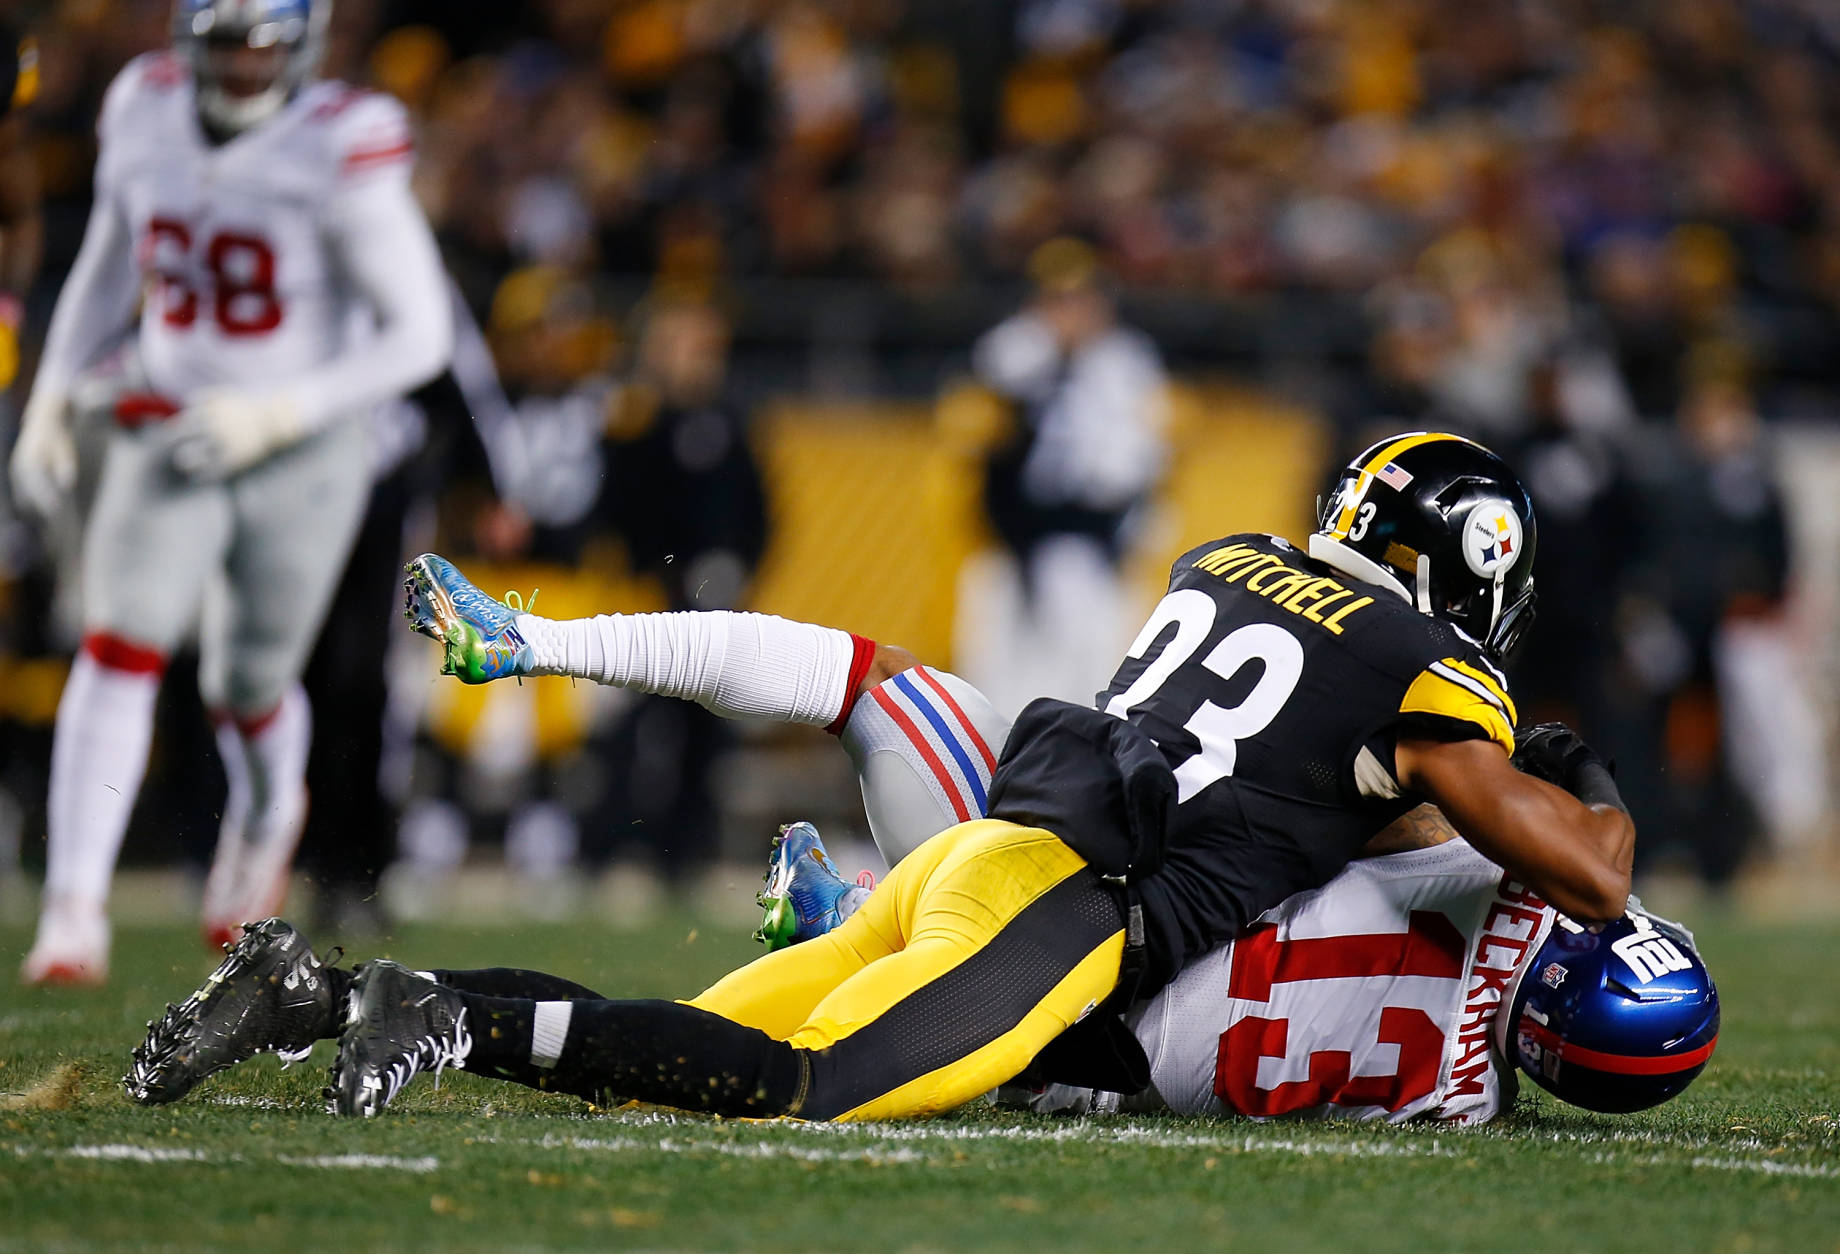 PITTSBURGH, PA - DECEMBER 04:  Odell Beckham #13 of the New York Giants is hit by Mike Mitchell #23 of the Pittsburgh Steelers after a catch in the first half during the game at Heinz Field on December 4, 2016 in Pittsburgh, Pennsylvania. (Photo by Justin K. Aller/Getty Images)